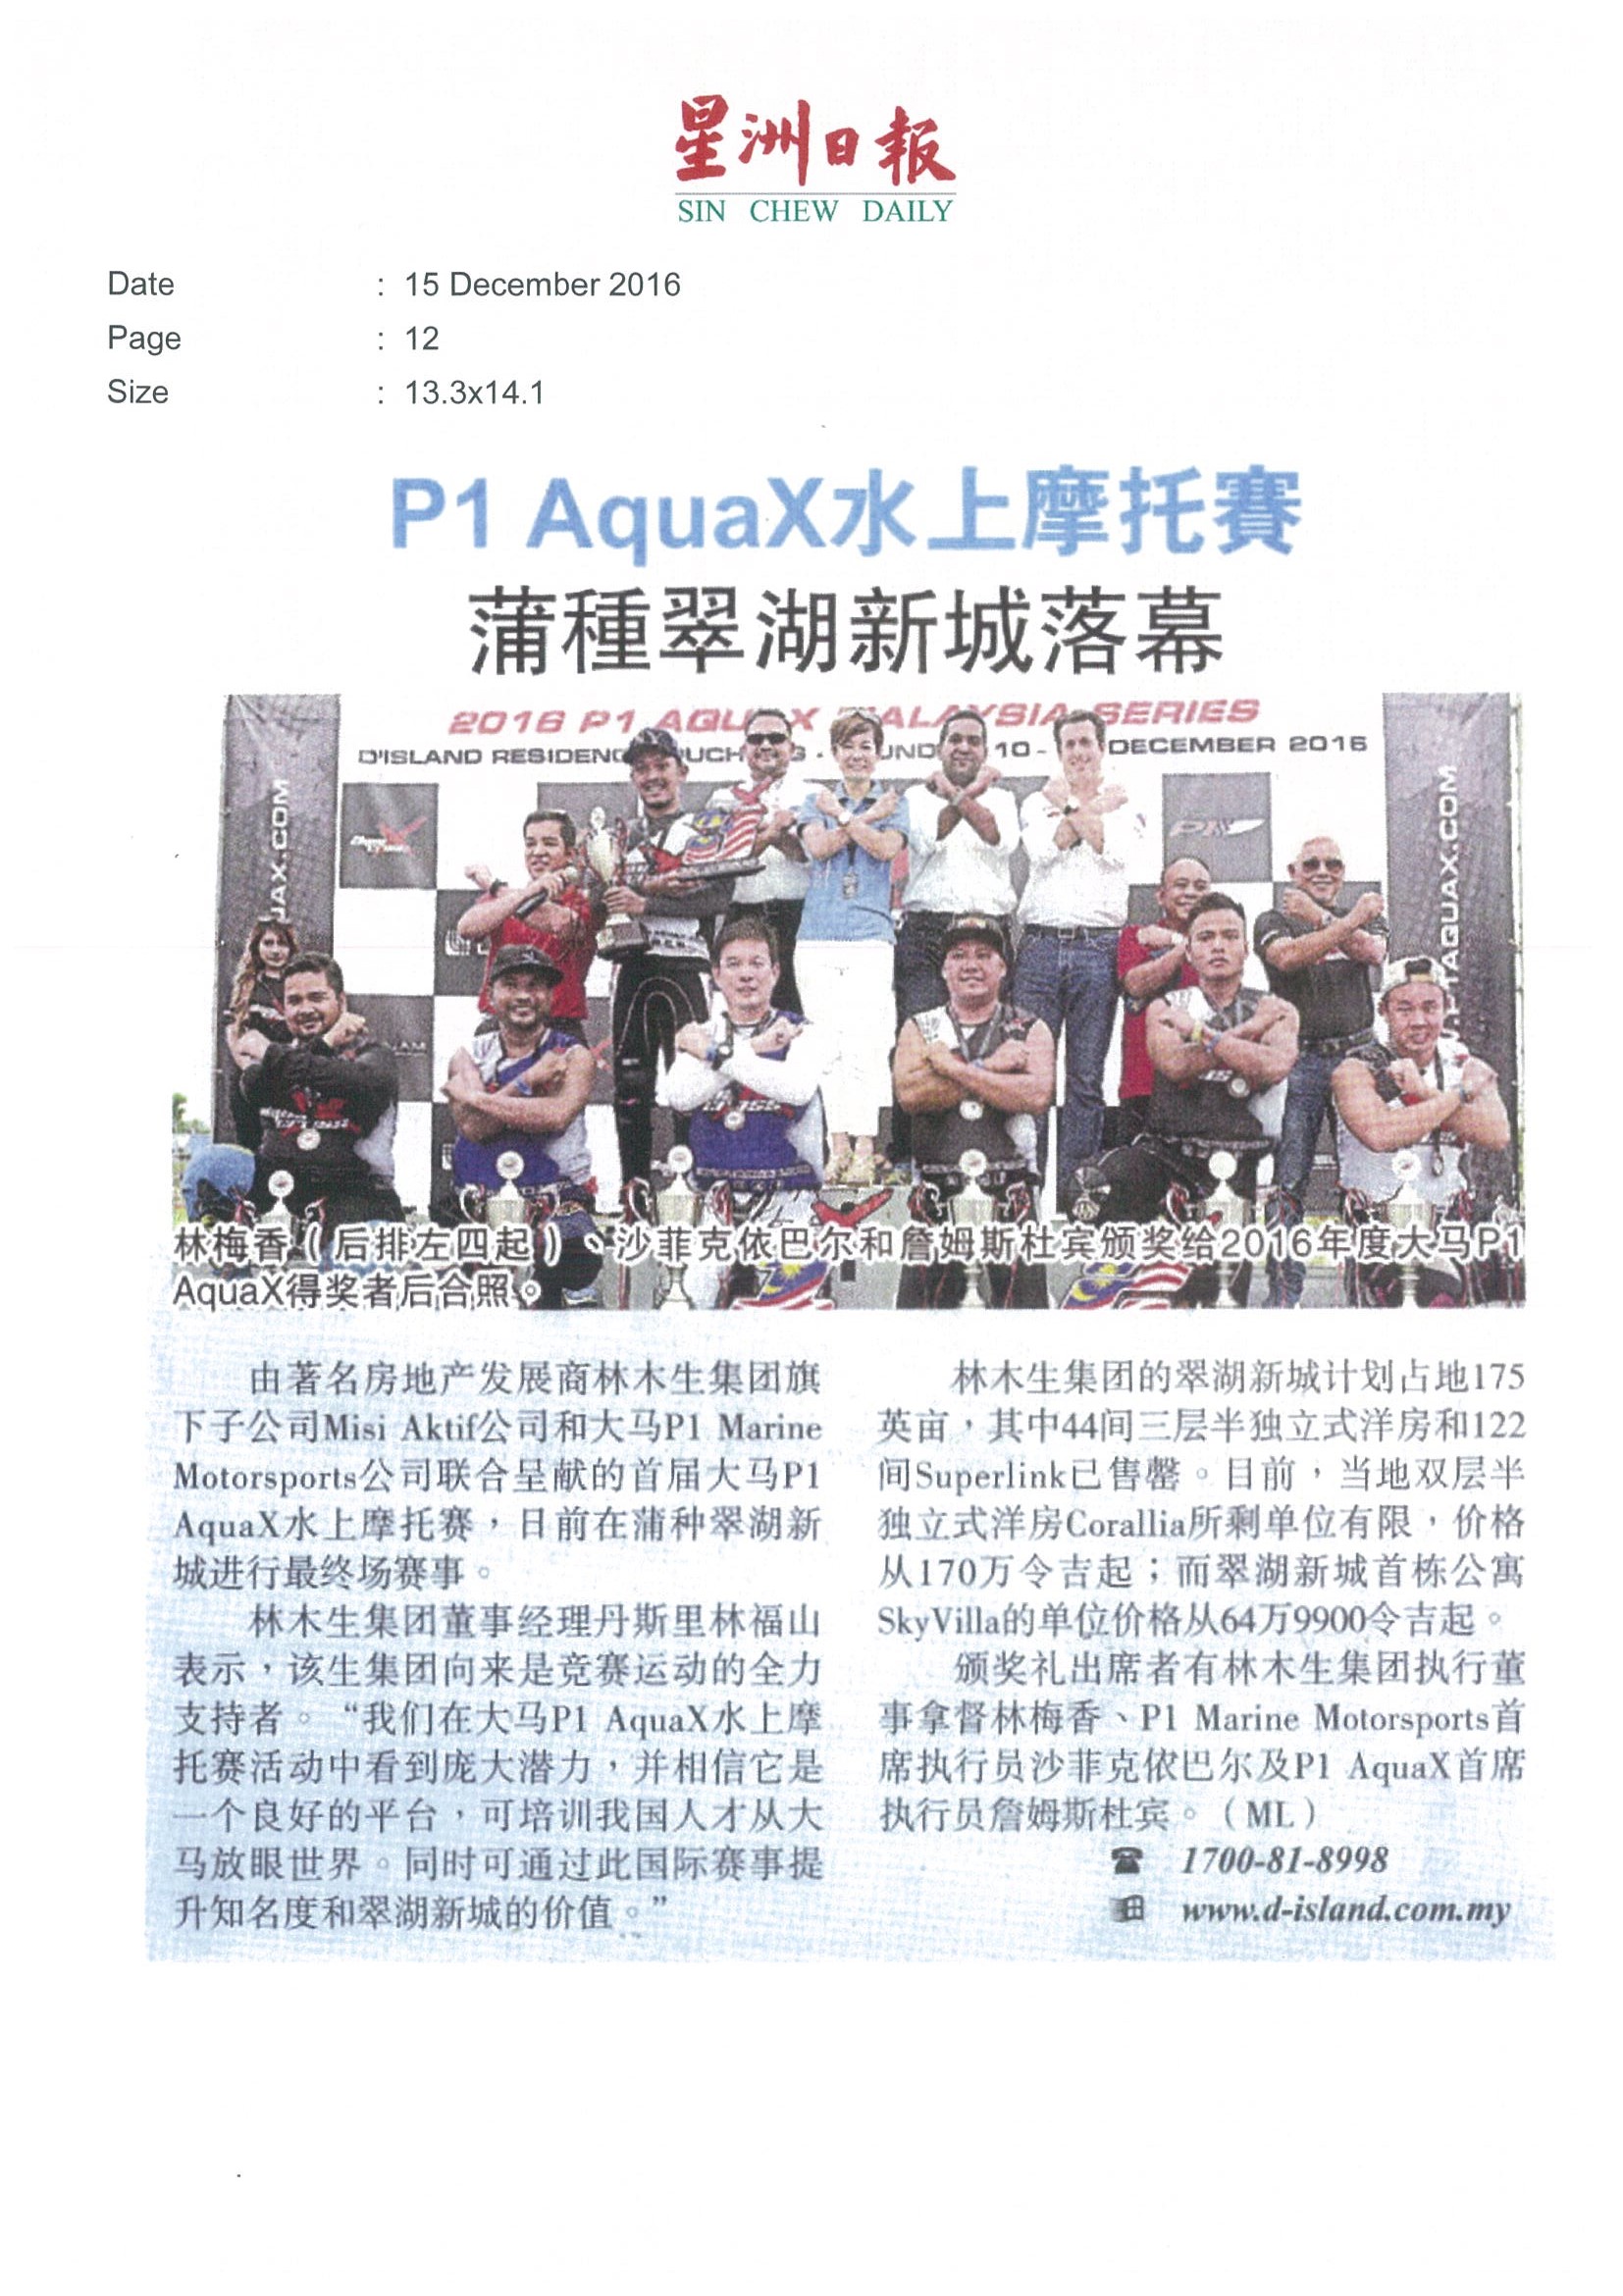 2016.12.15 Sin Chew – P1 AquaX jet skiing ended perfect in Puchong D’Island